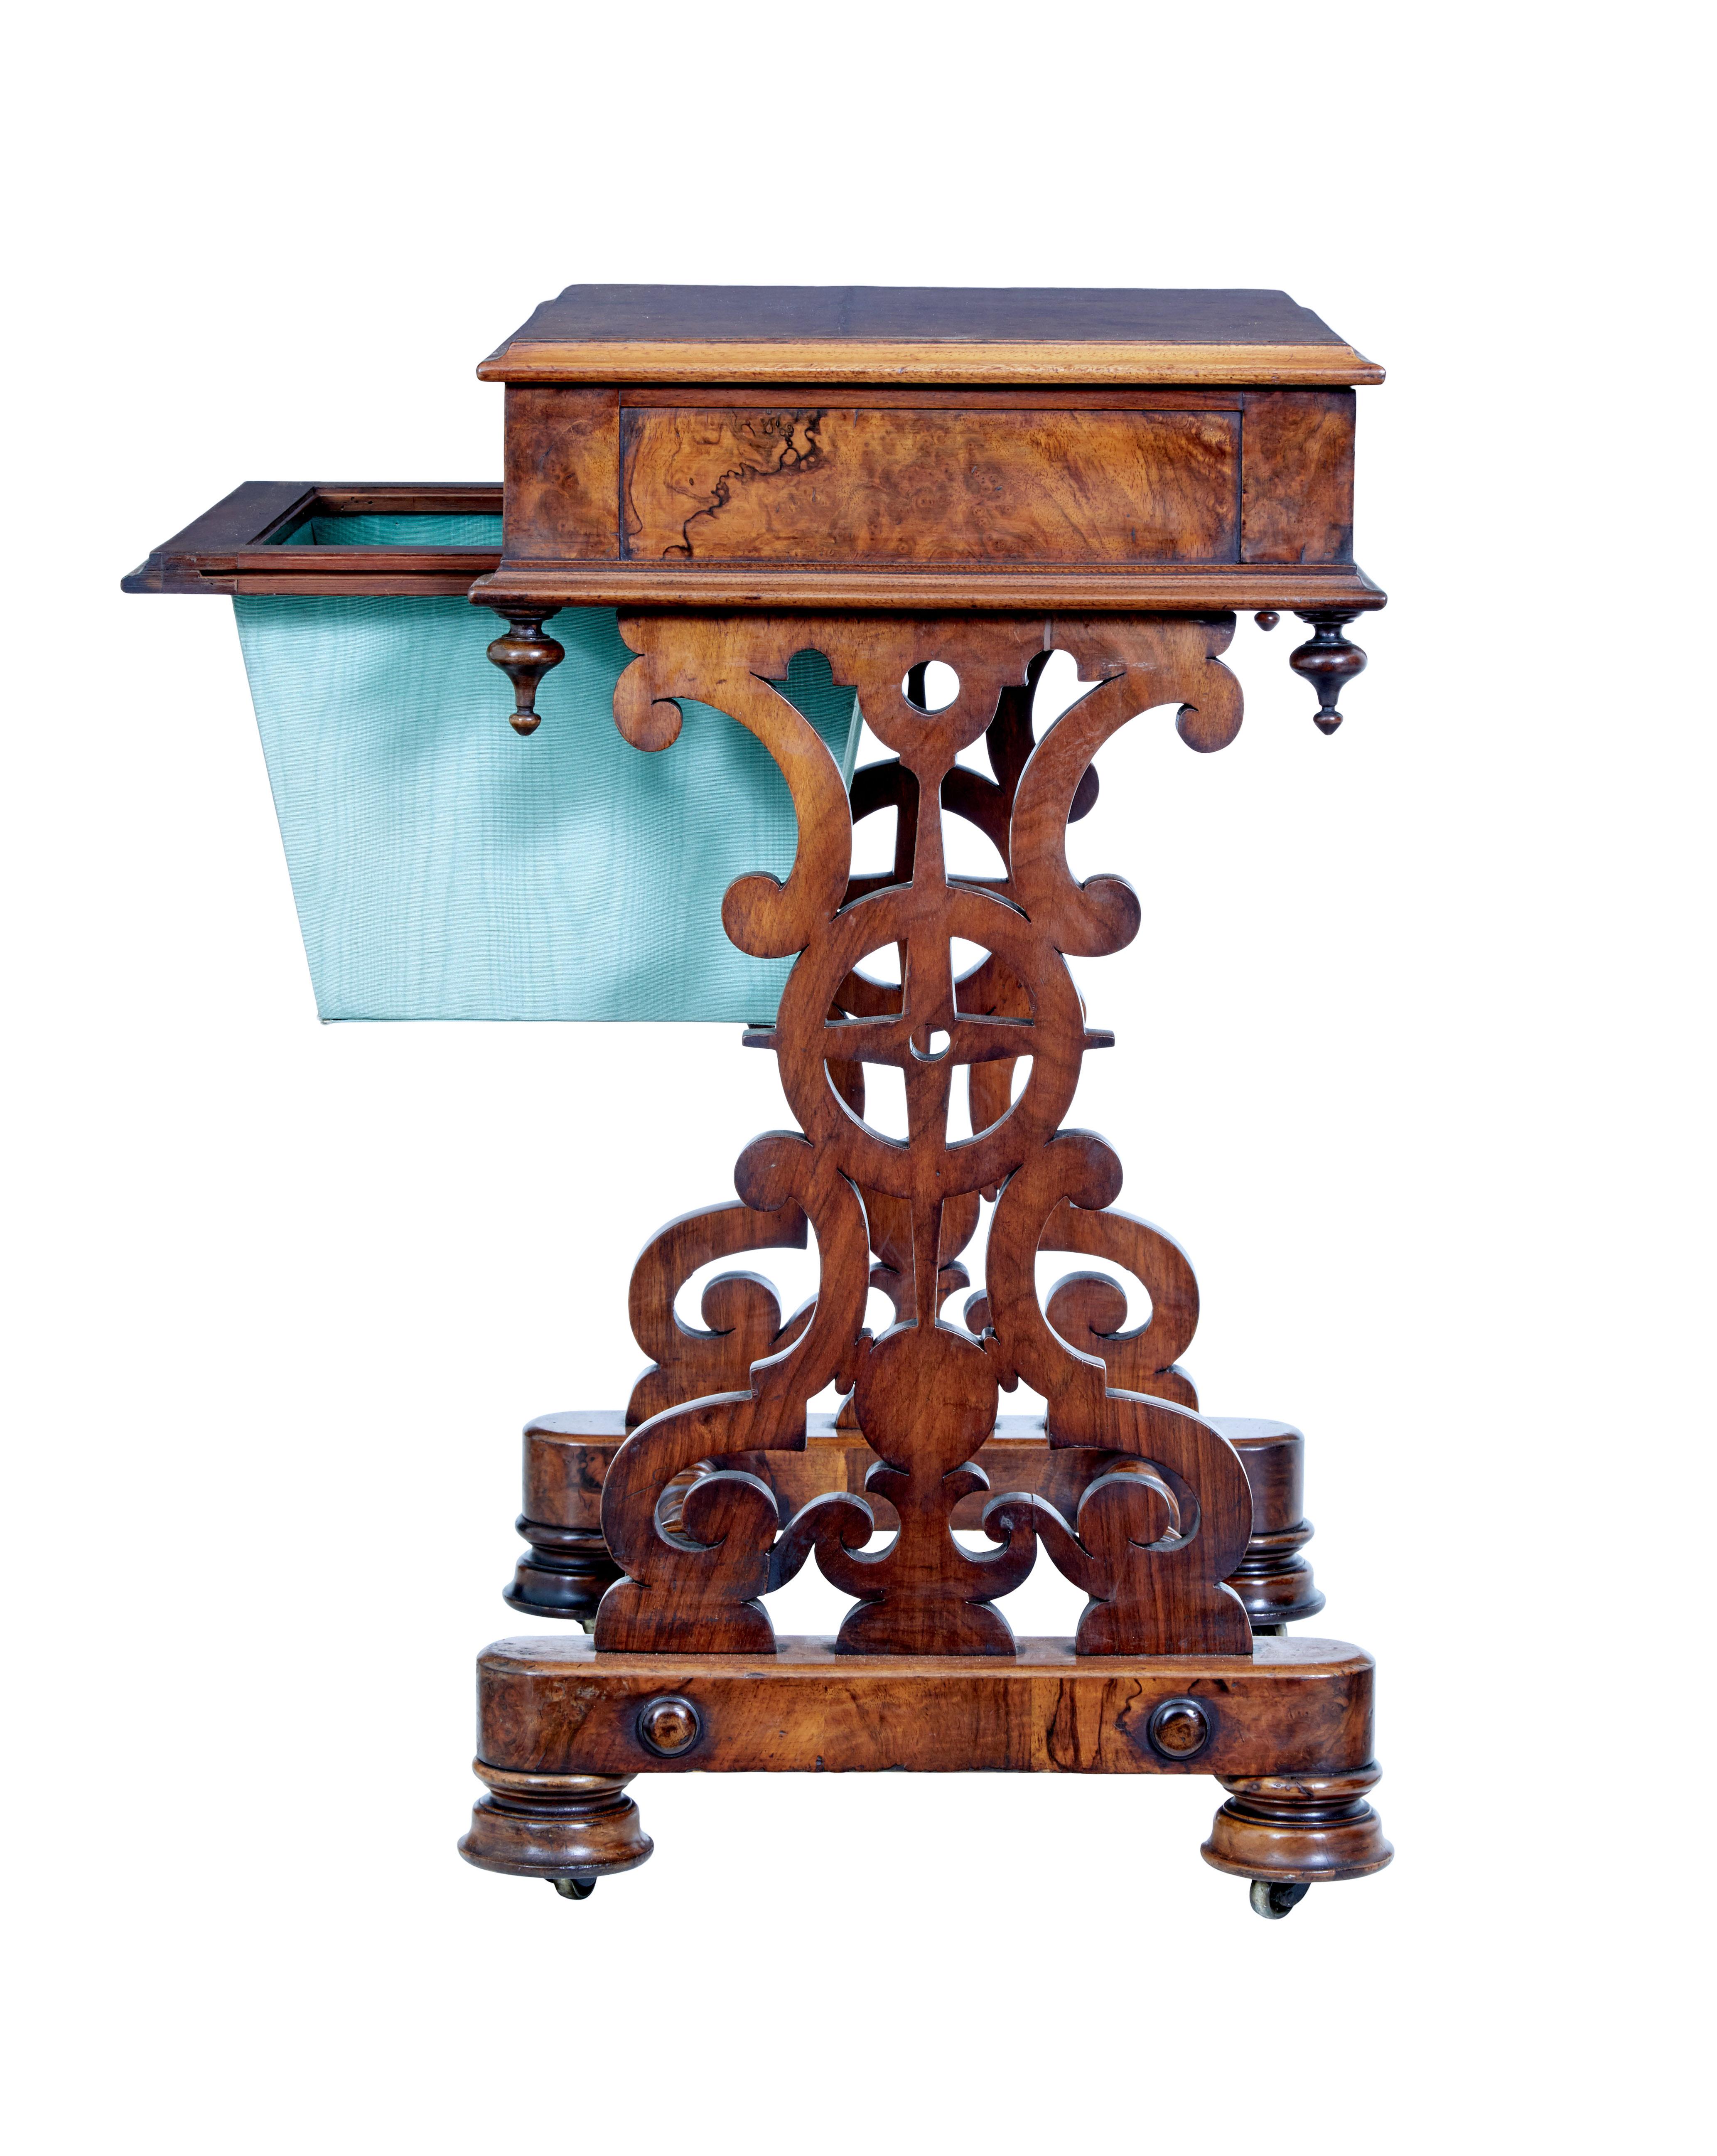 Hand-Carved 19th Century High Victorian Burr Walnut Occasional Table